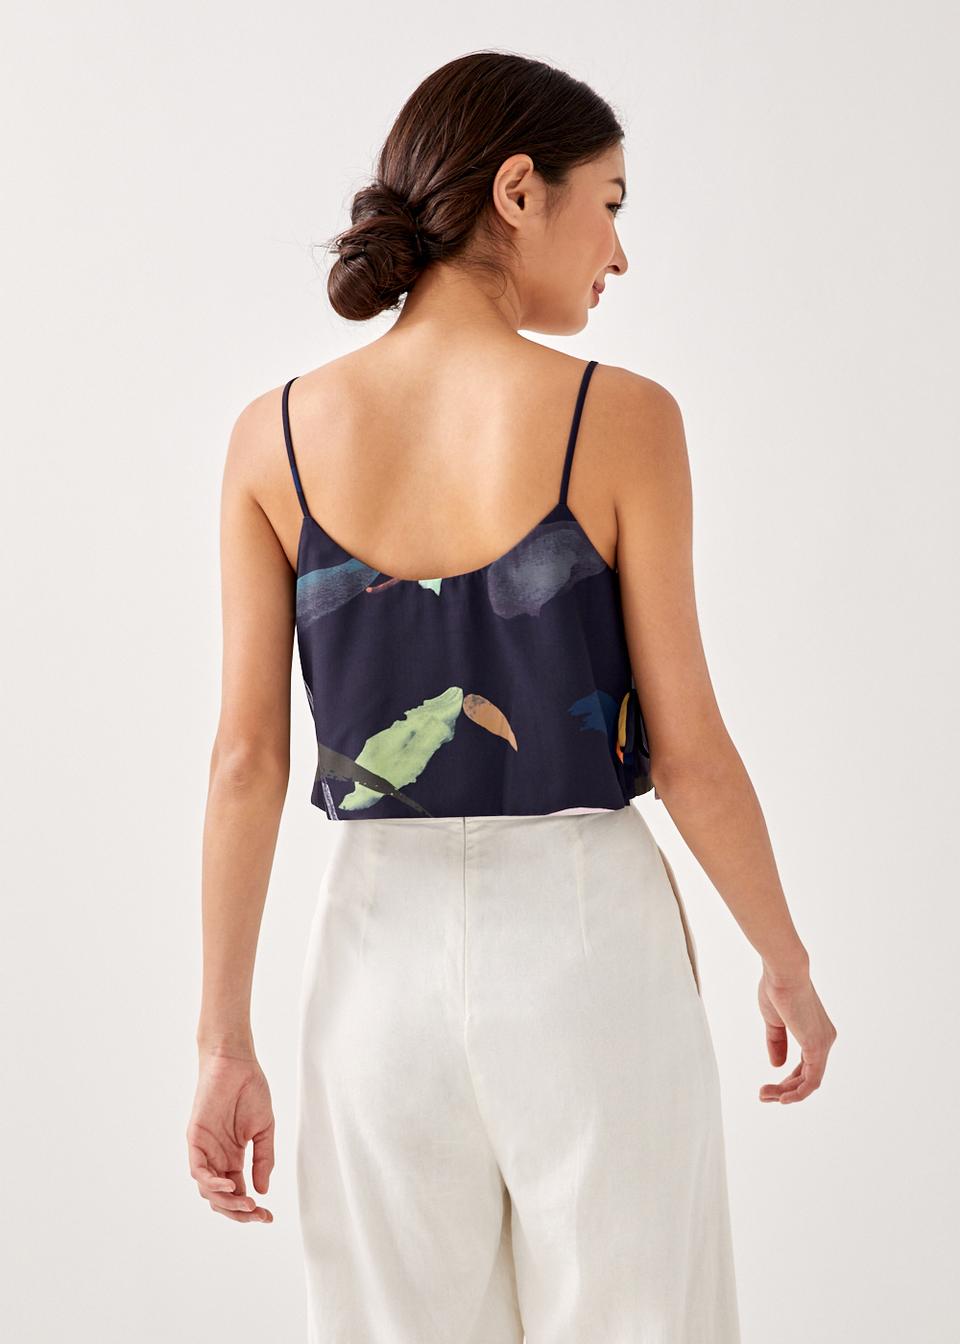 Augustine Cropped Foldover Camisole Top in Spring Medley